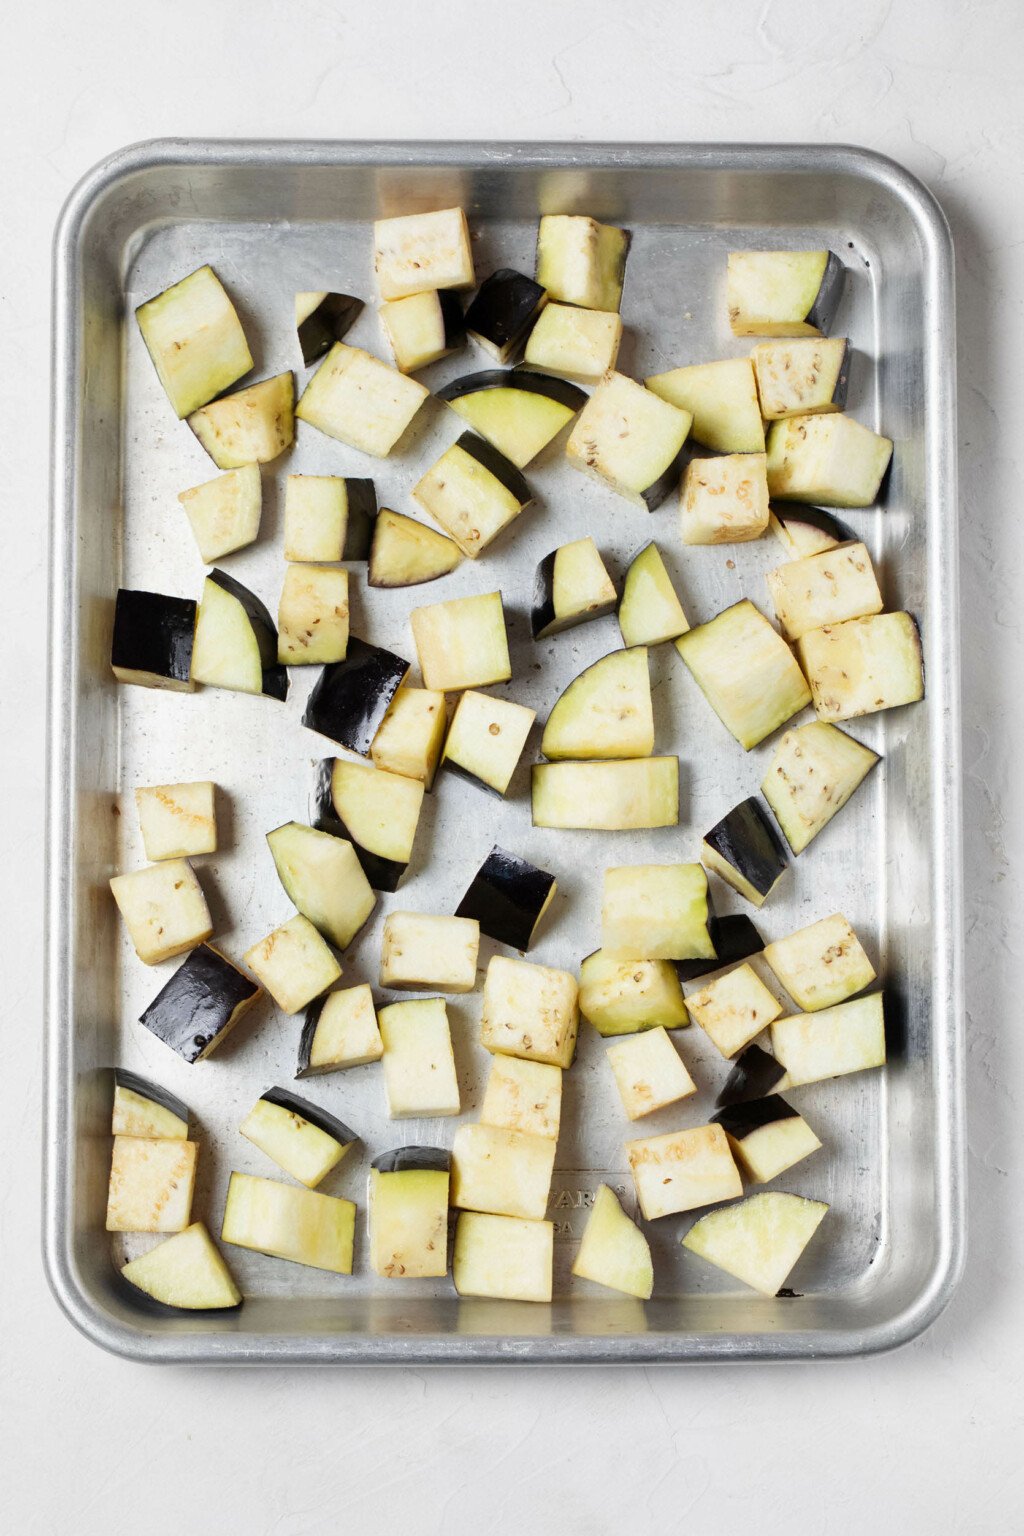 A silver baking sheet is topped with cubed eggplant, ready to be roasted.